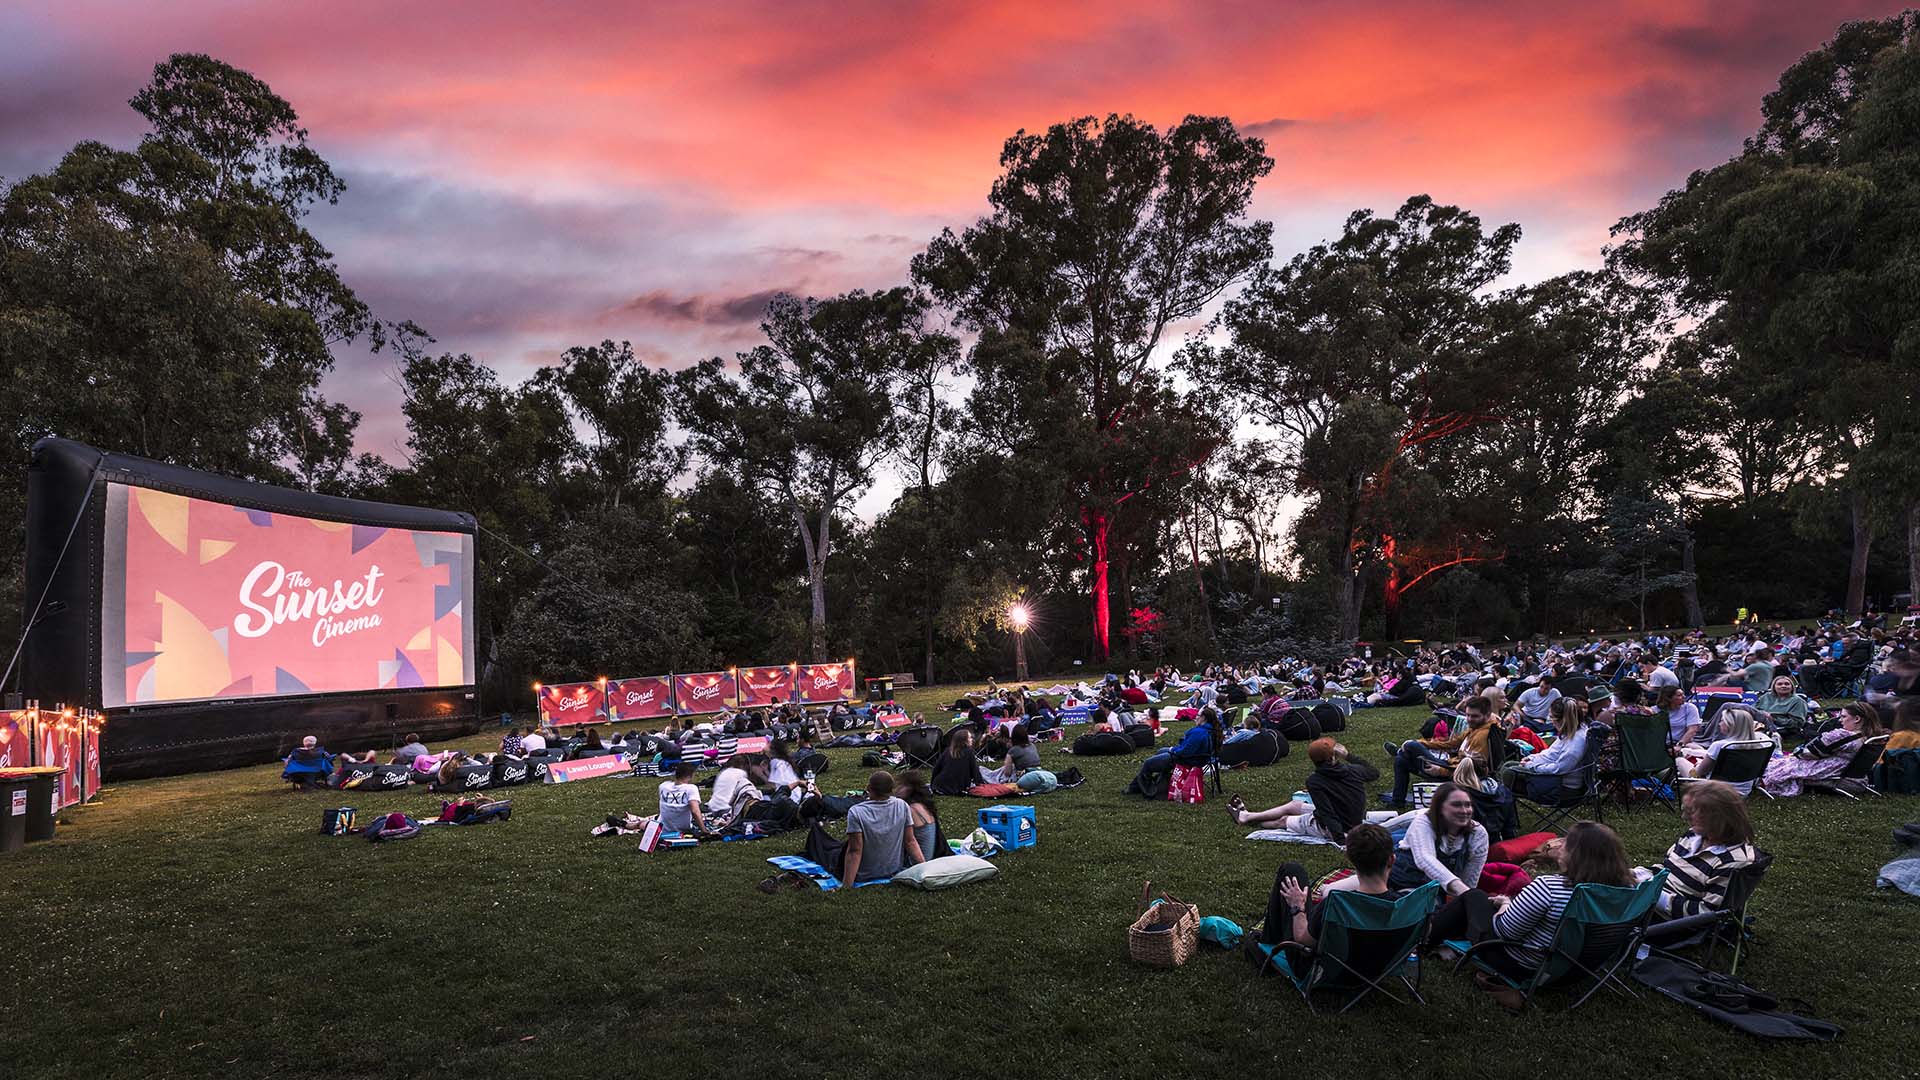 Sunset Cinema Is Touring the East Coast for Another Summer (and Autumn) of Movies Under the Stars